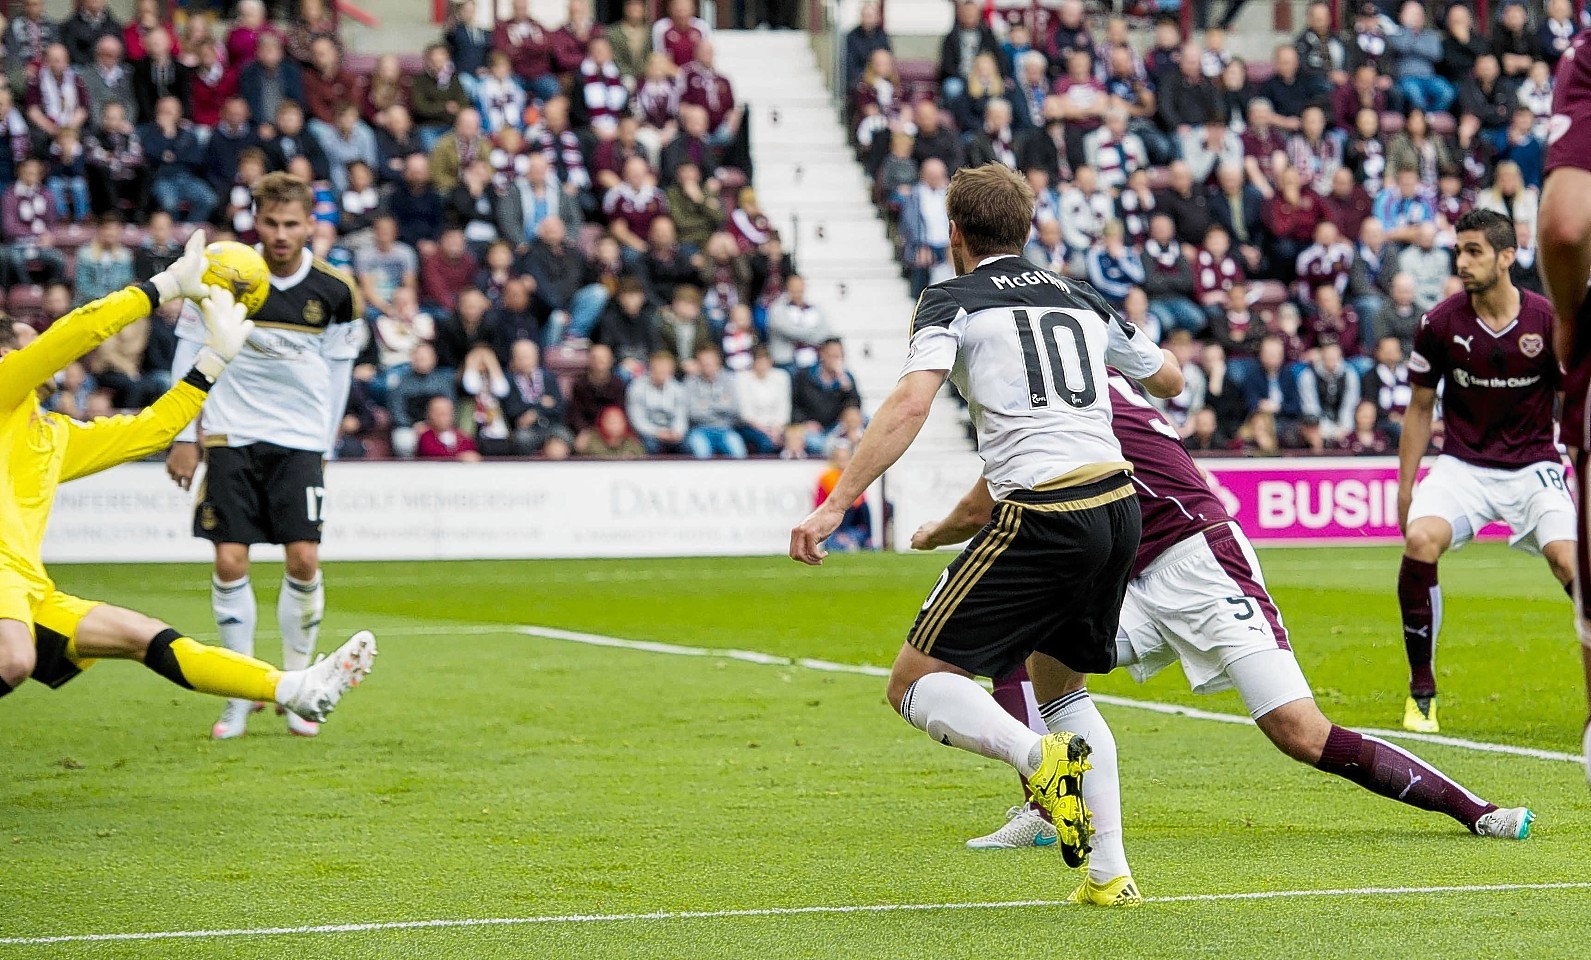 McGinn (10) hammers the ball home to double the lead for his side